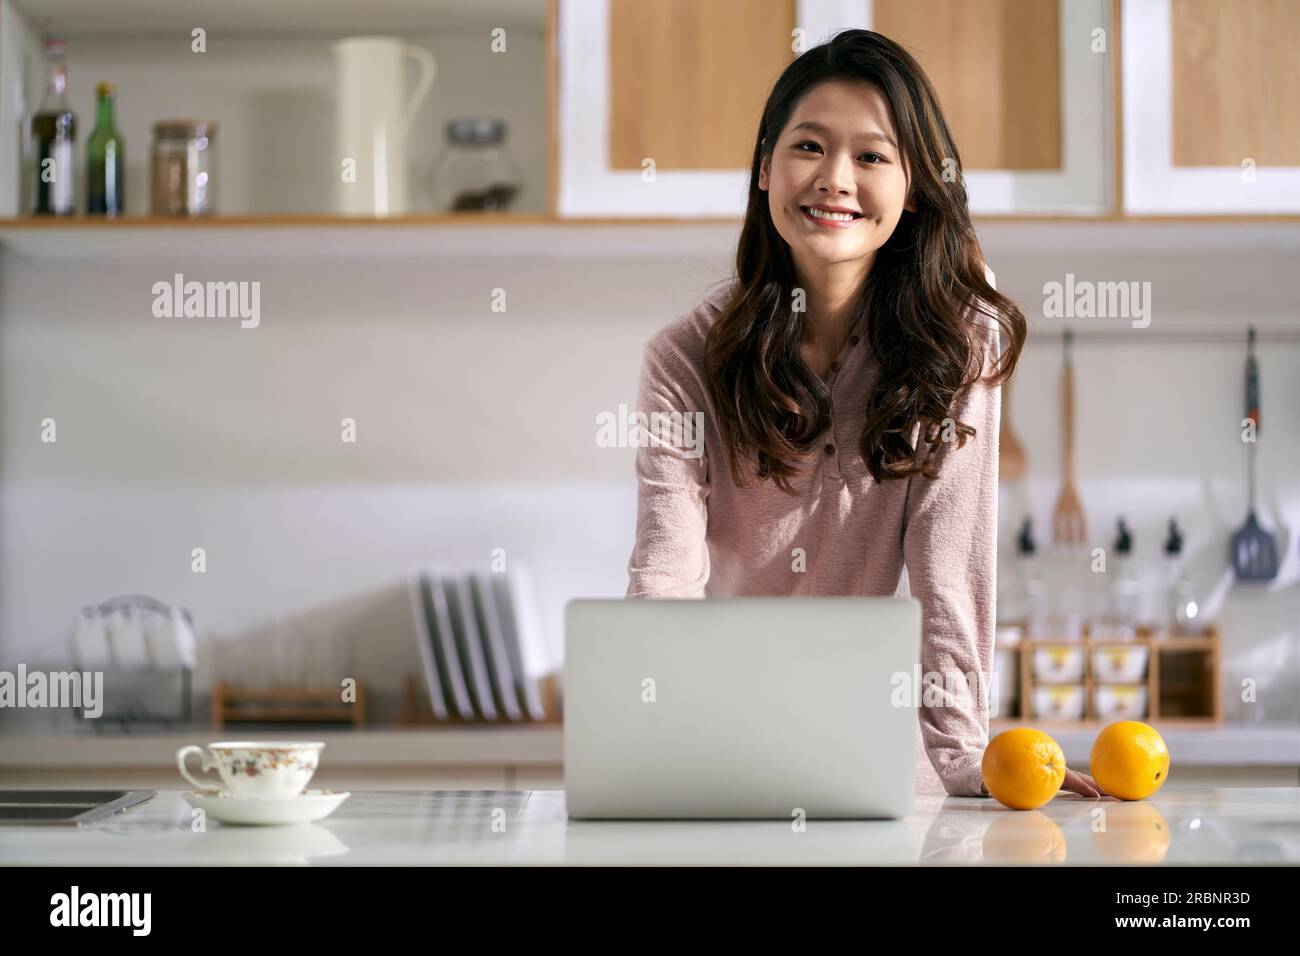 portrait of a happy successful woman female freelancer standing behind kitchen counter at home looking at camera smiling Stock Photo